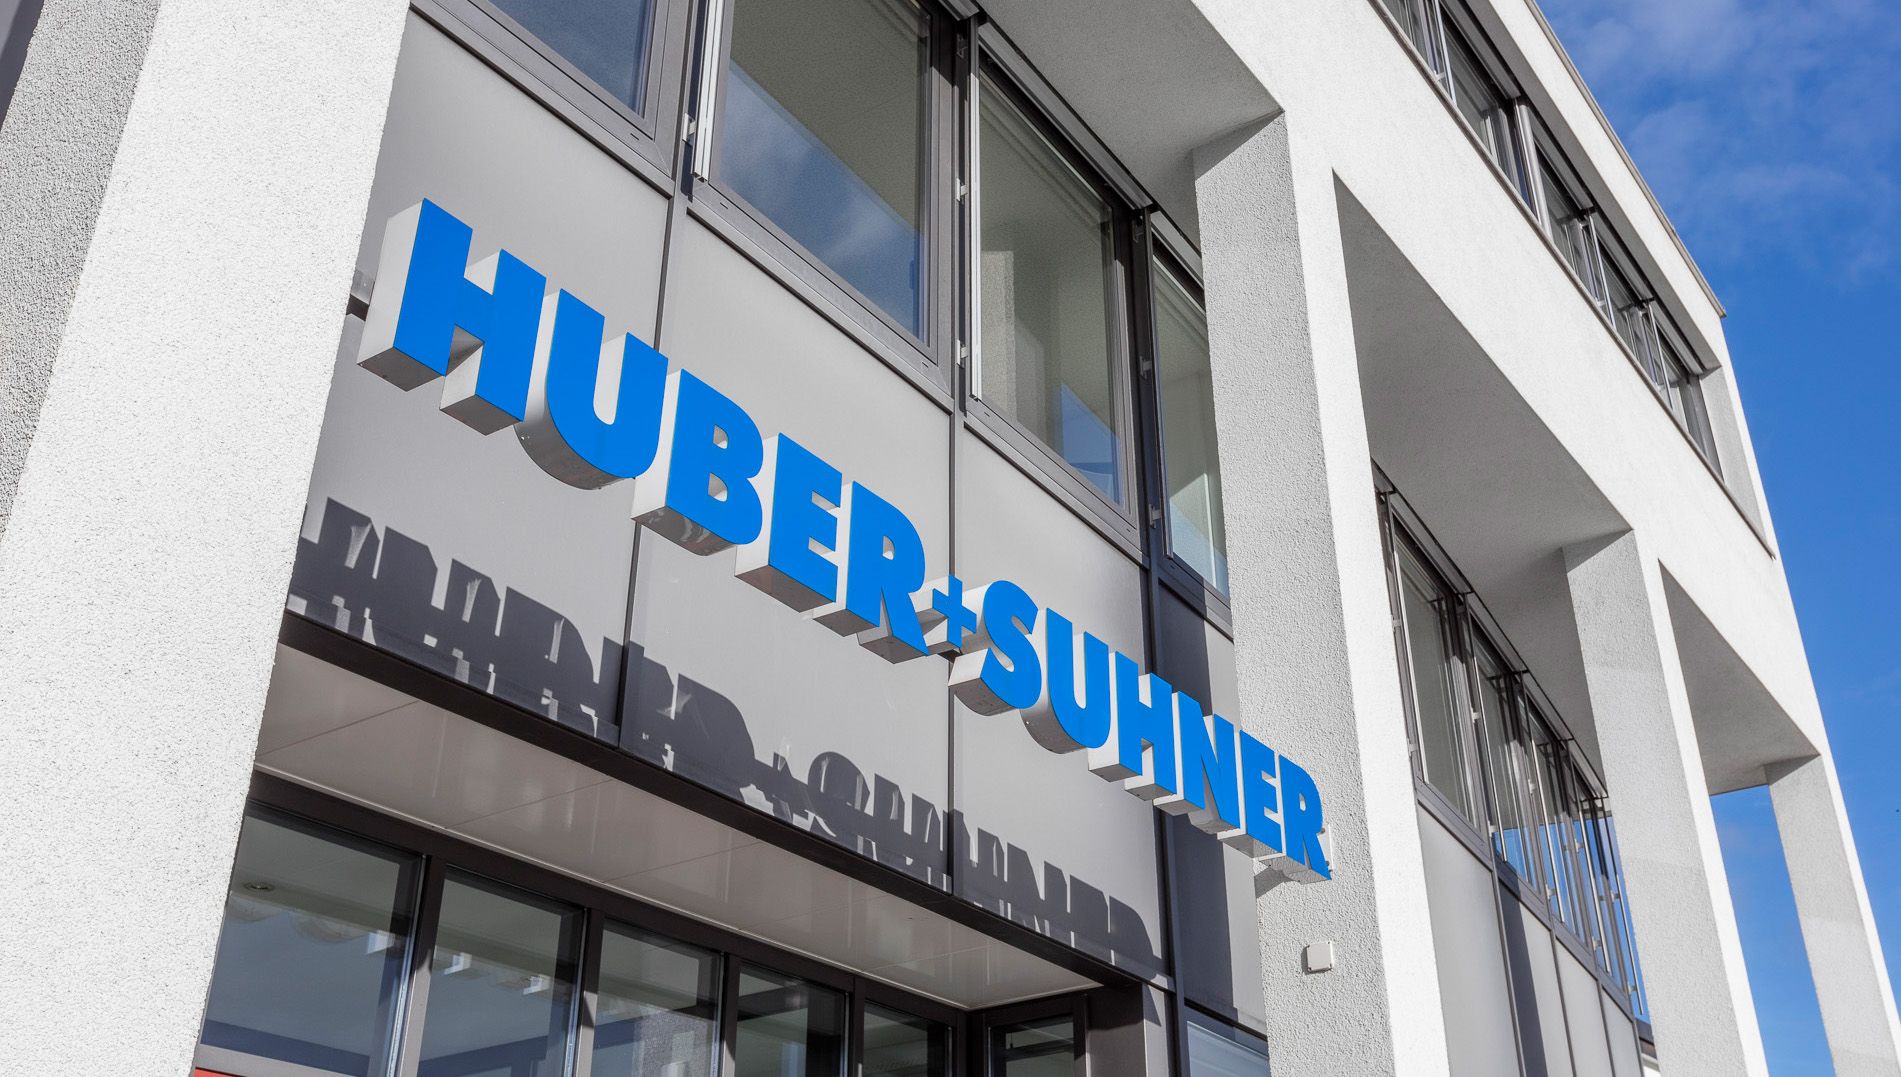 HUBER+SUHNER becomes supplier of radar antennas to leading Tier 1 automotive supplier